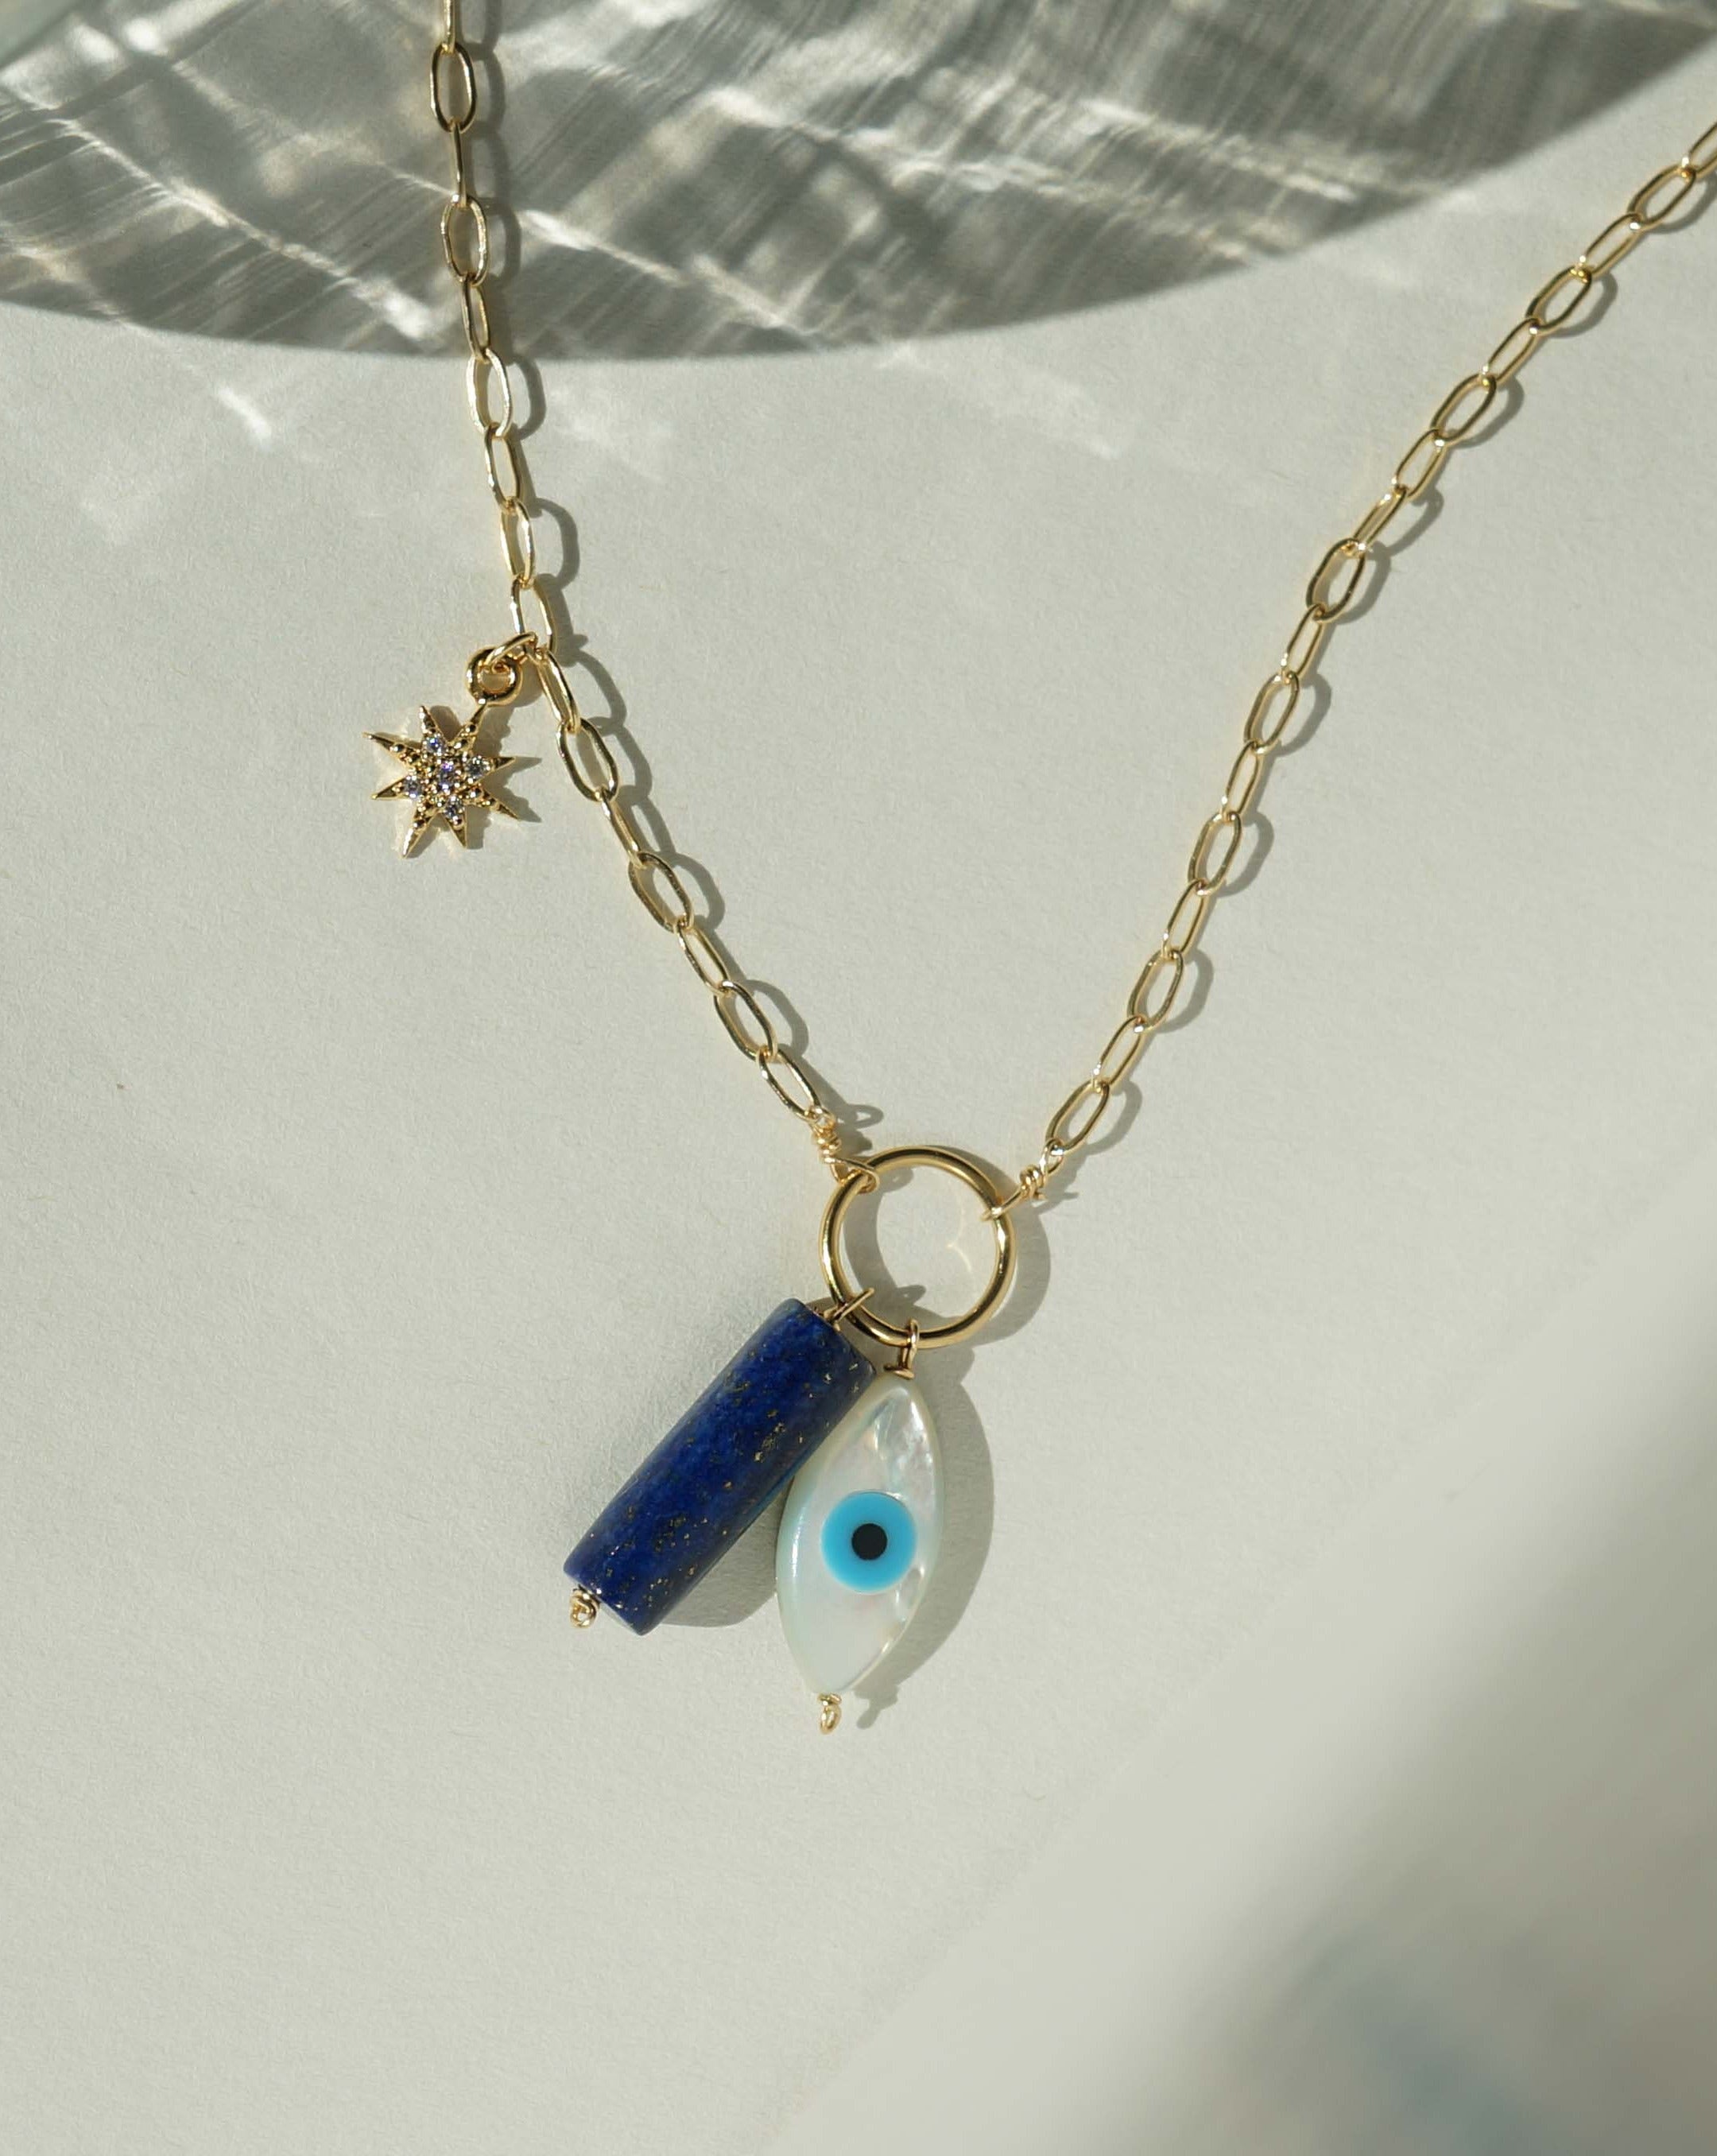 Eye Chakra Necklace by KOZAKH. A 14K Gold Filled necklace with adjustable length from 20 inches, featuring a hand carved Mother of Pearl Evil Eye, a cylindrical cut Lapis, and a Cubic Zirconia encrusted star charm.